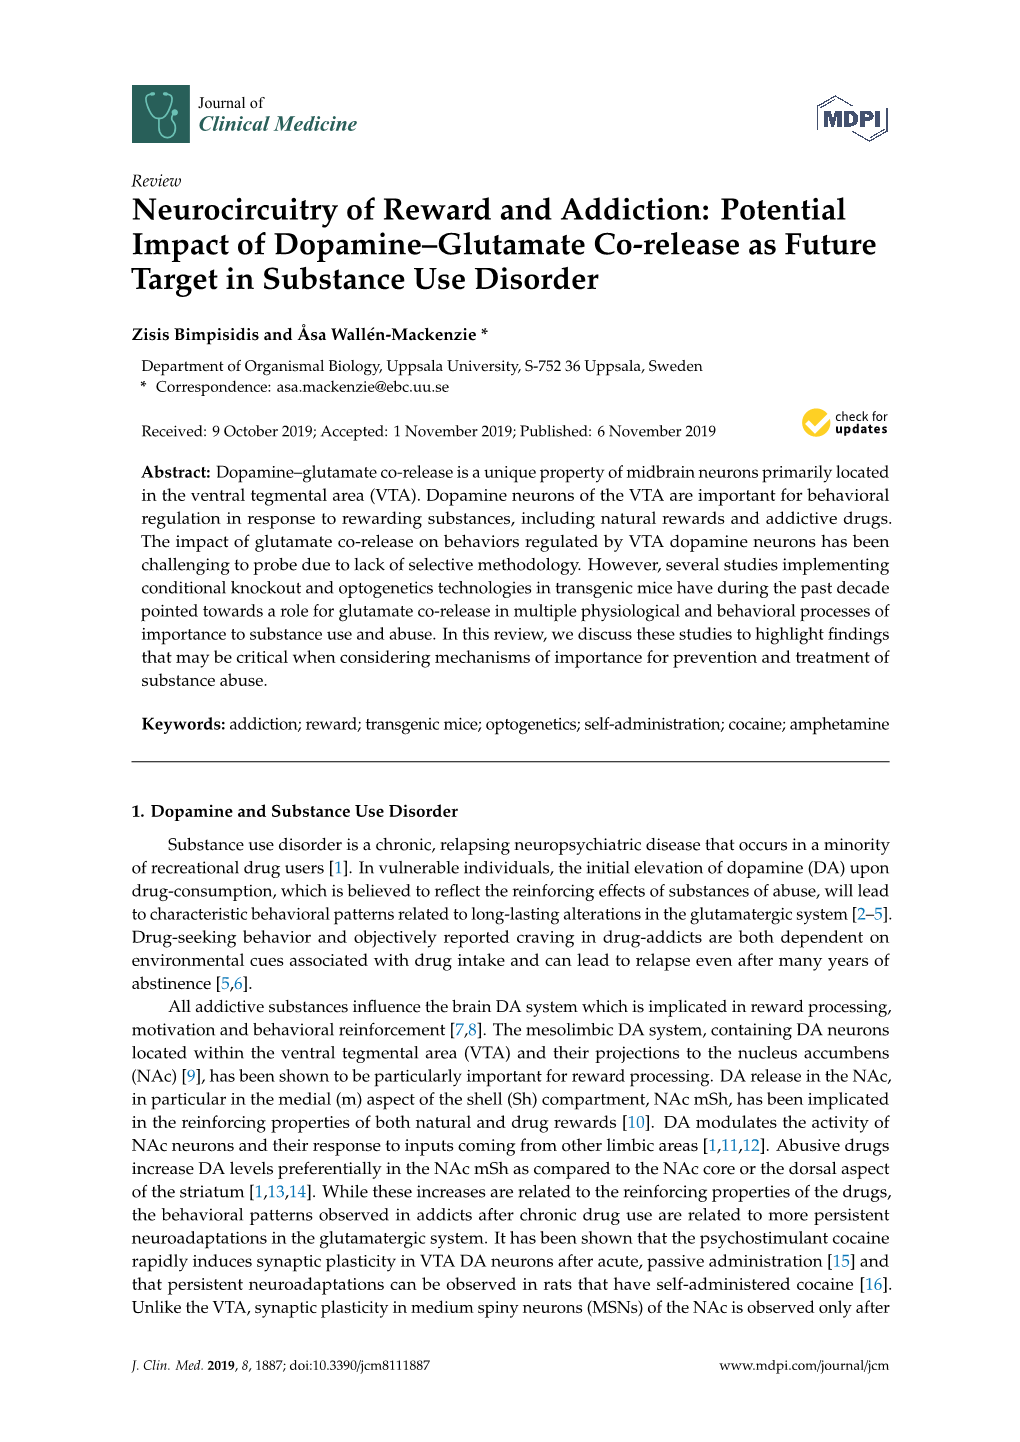 Potential Impact of Dopamine–Glutamate Co-Release As Future Target in Substance Use Disorder